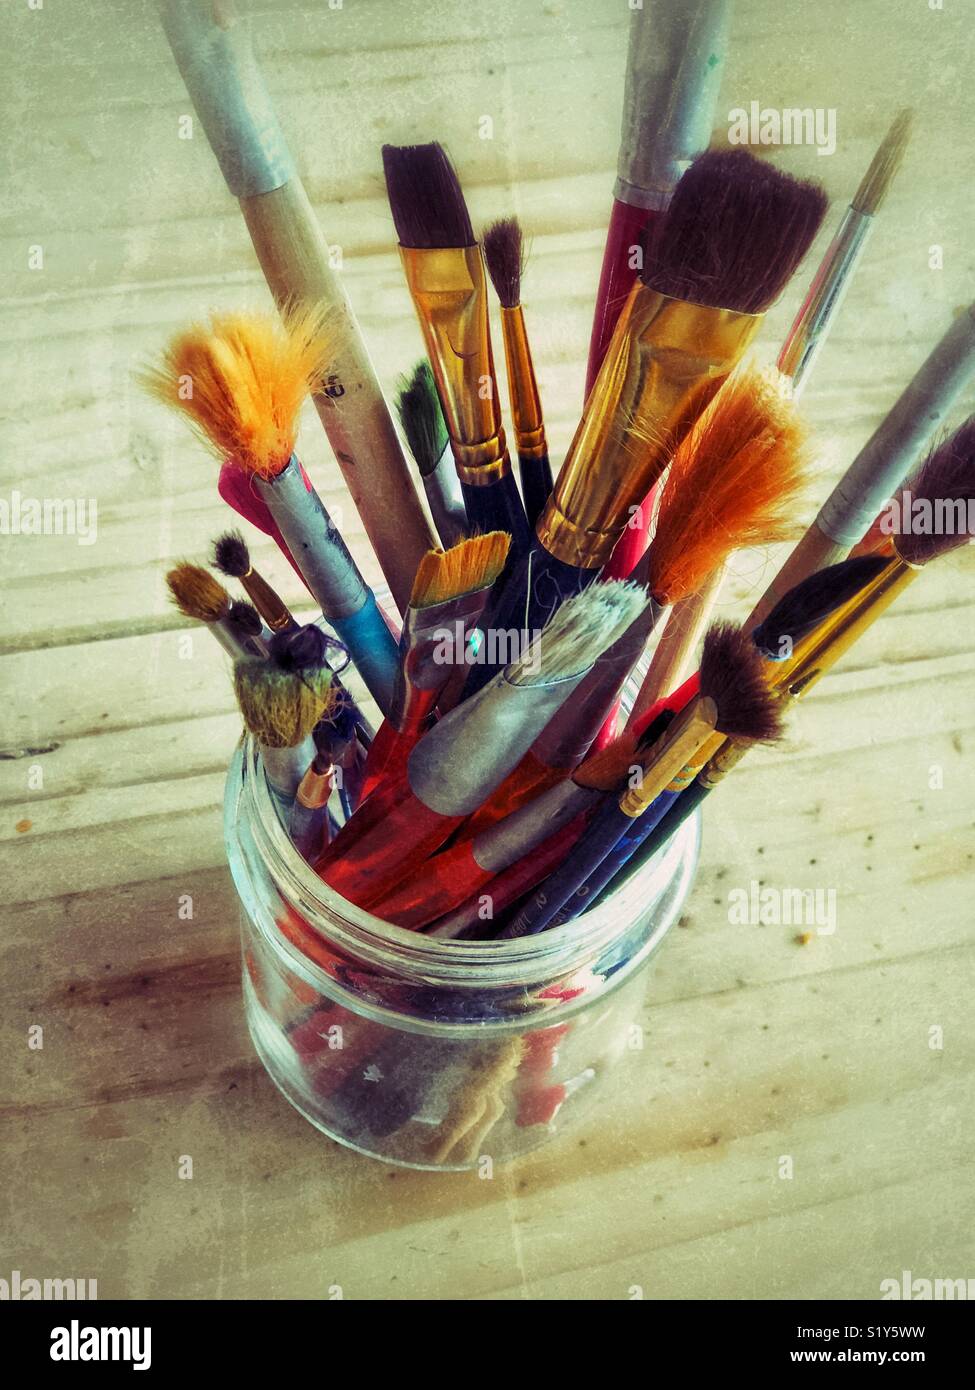 Closeup view of looking down into glass jar full of mixed art paintbrushes Stock Photo